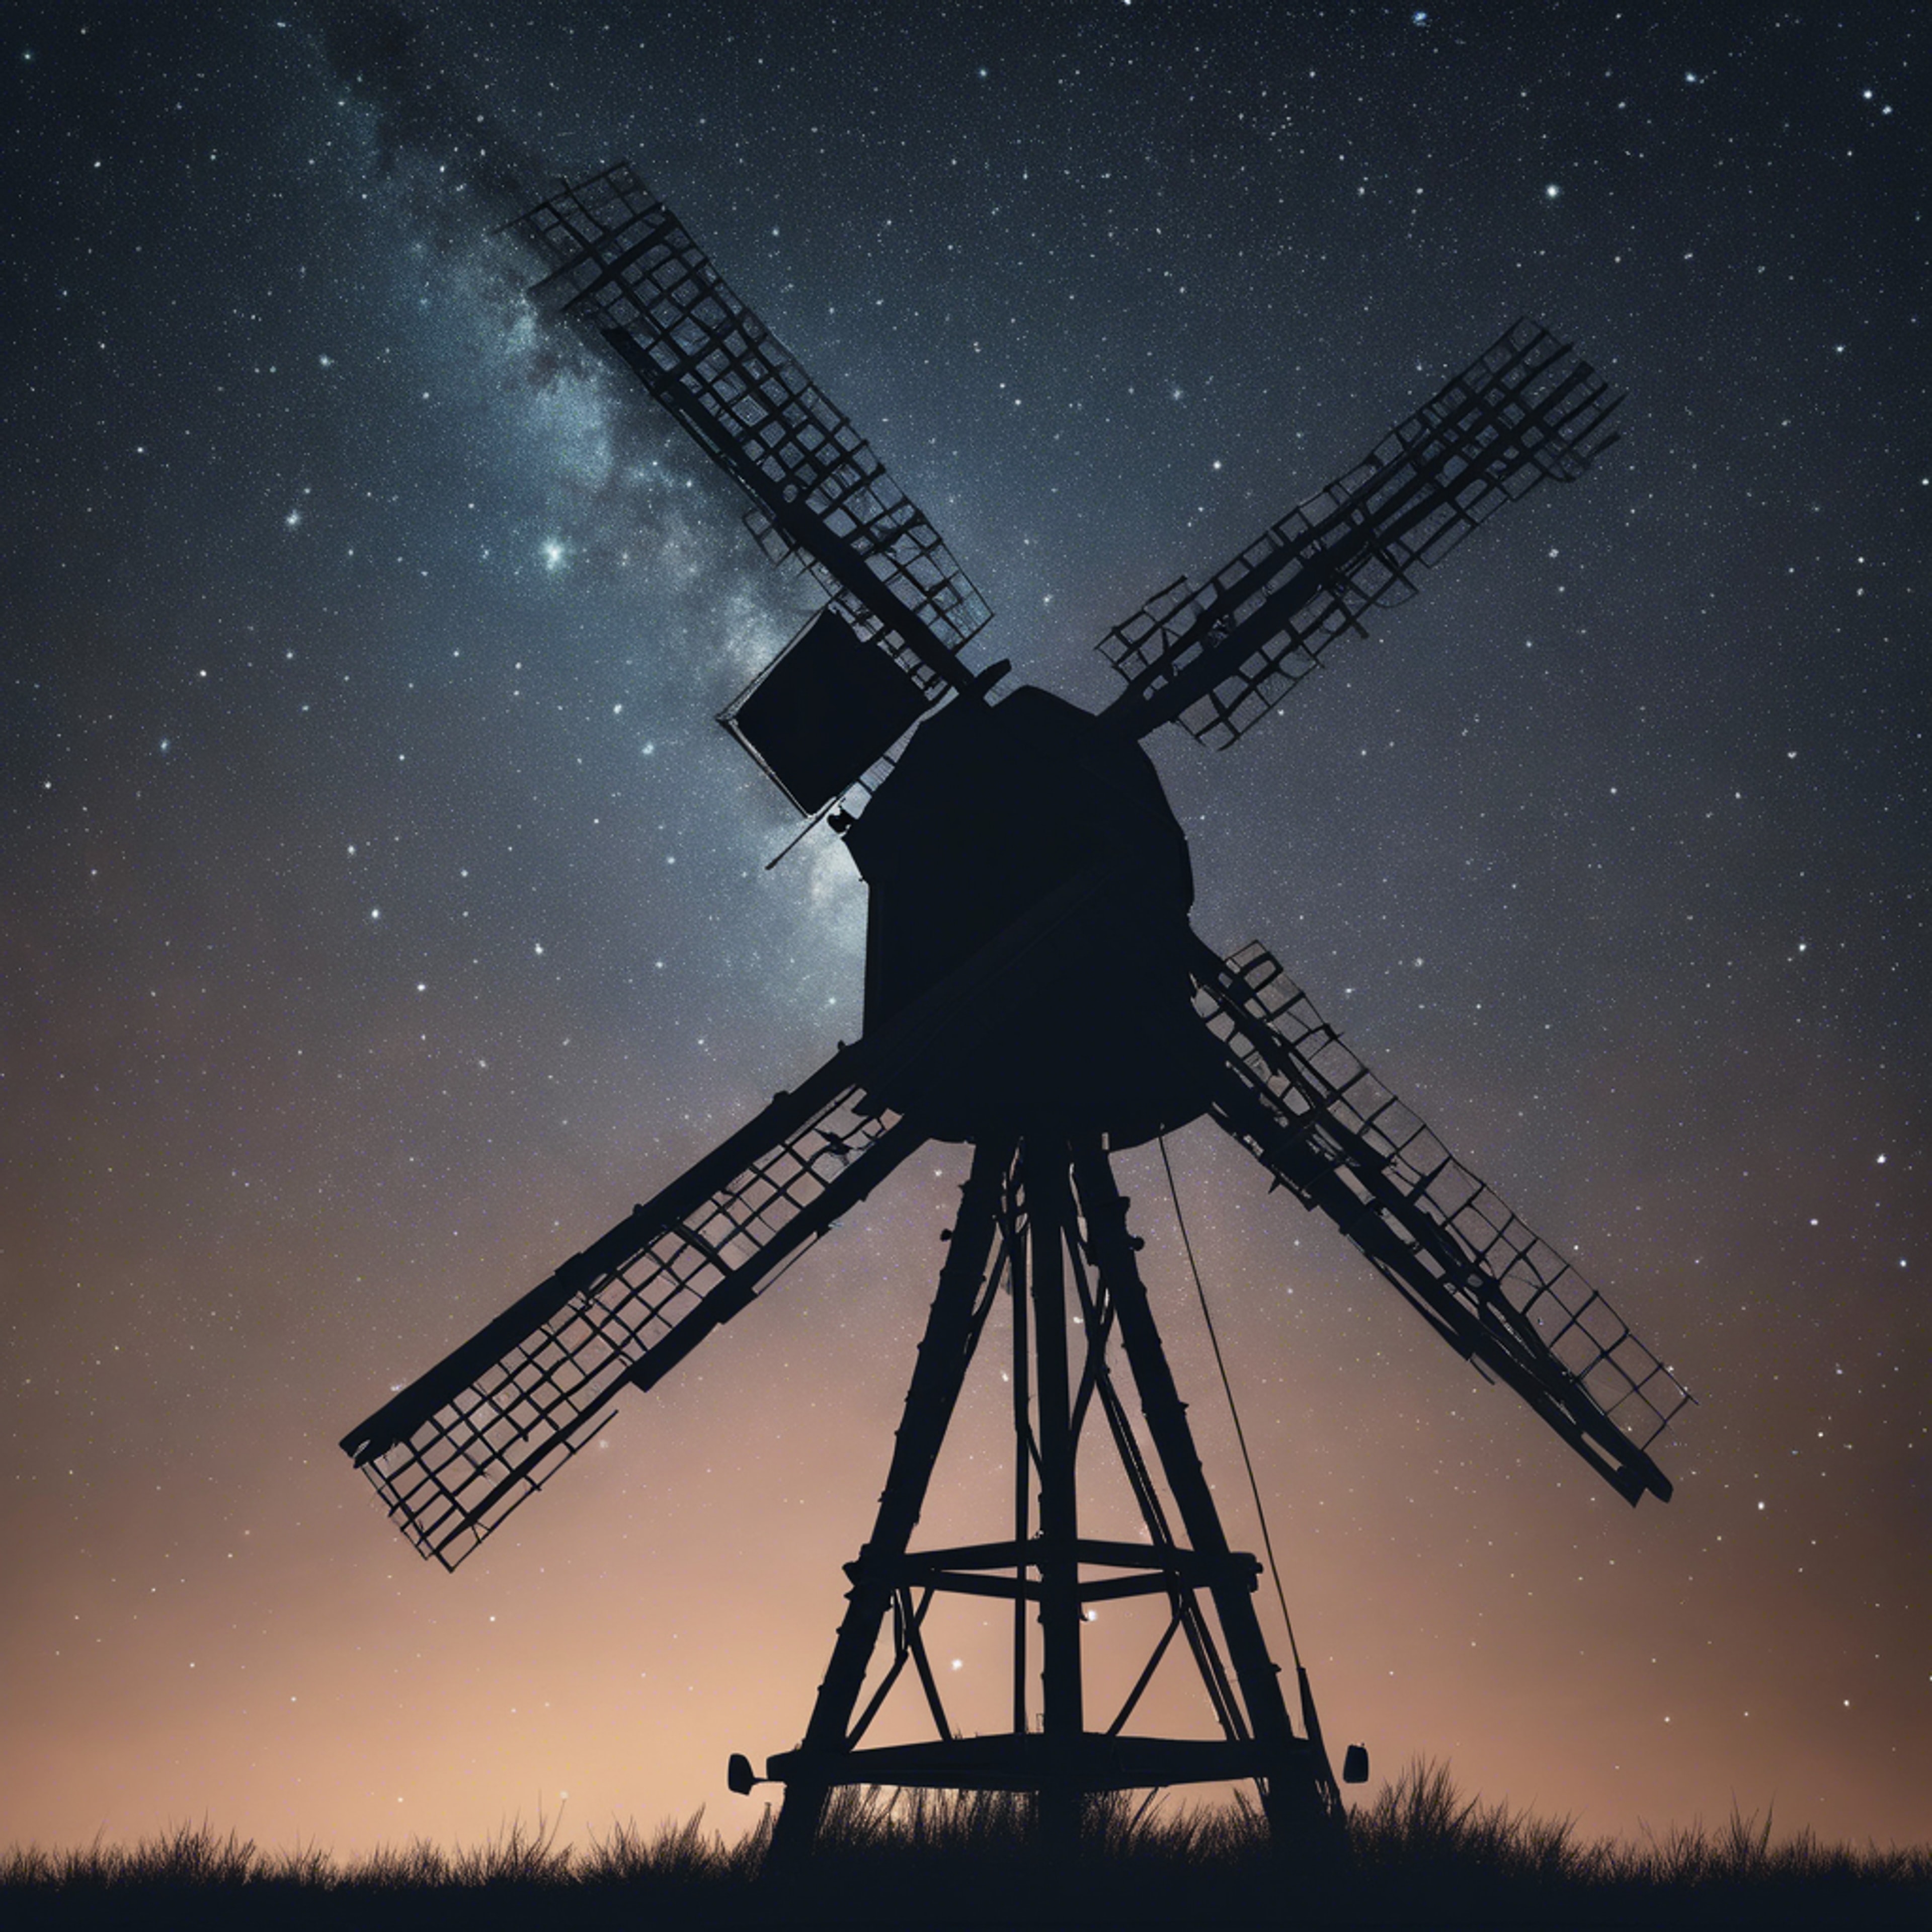 A silhouette of a traditional windmill against a mesmerizing starry night sky. Hình nền[d821762278f94928b618]